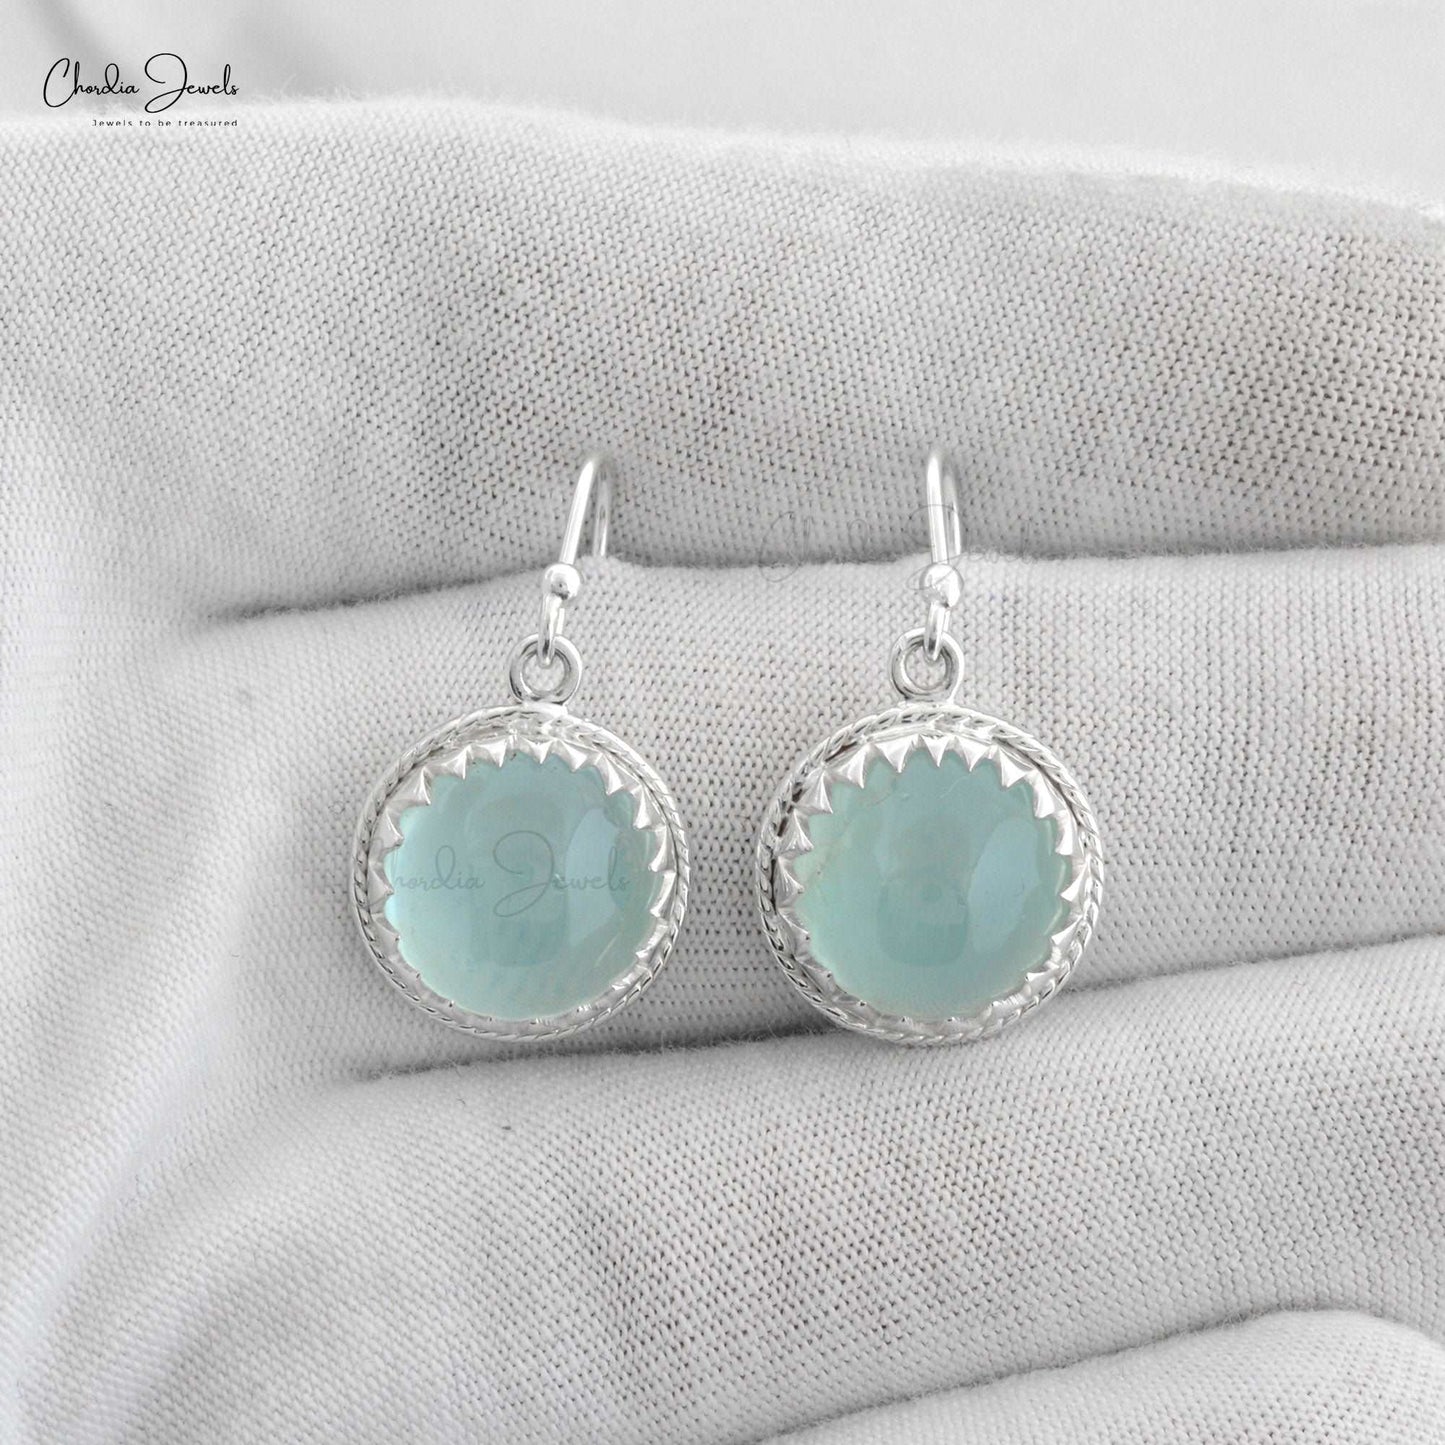 Load image into Gallery viewer, 100% Natural Blue Aquamarine Solitaire Dangling Earrings 925 Sterling Silver Bezel Set Earrings At Wholesale Price
